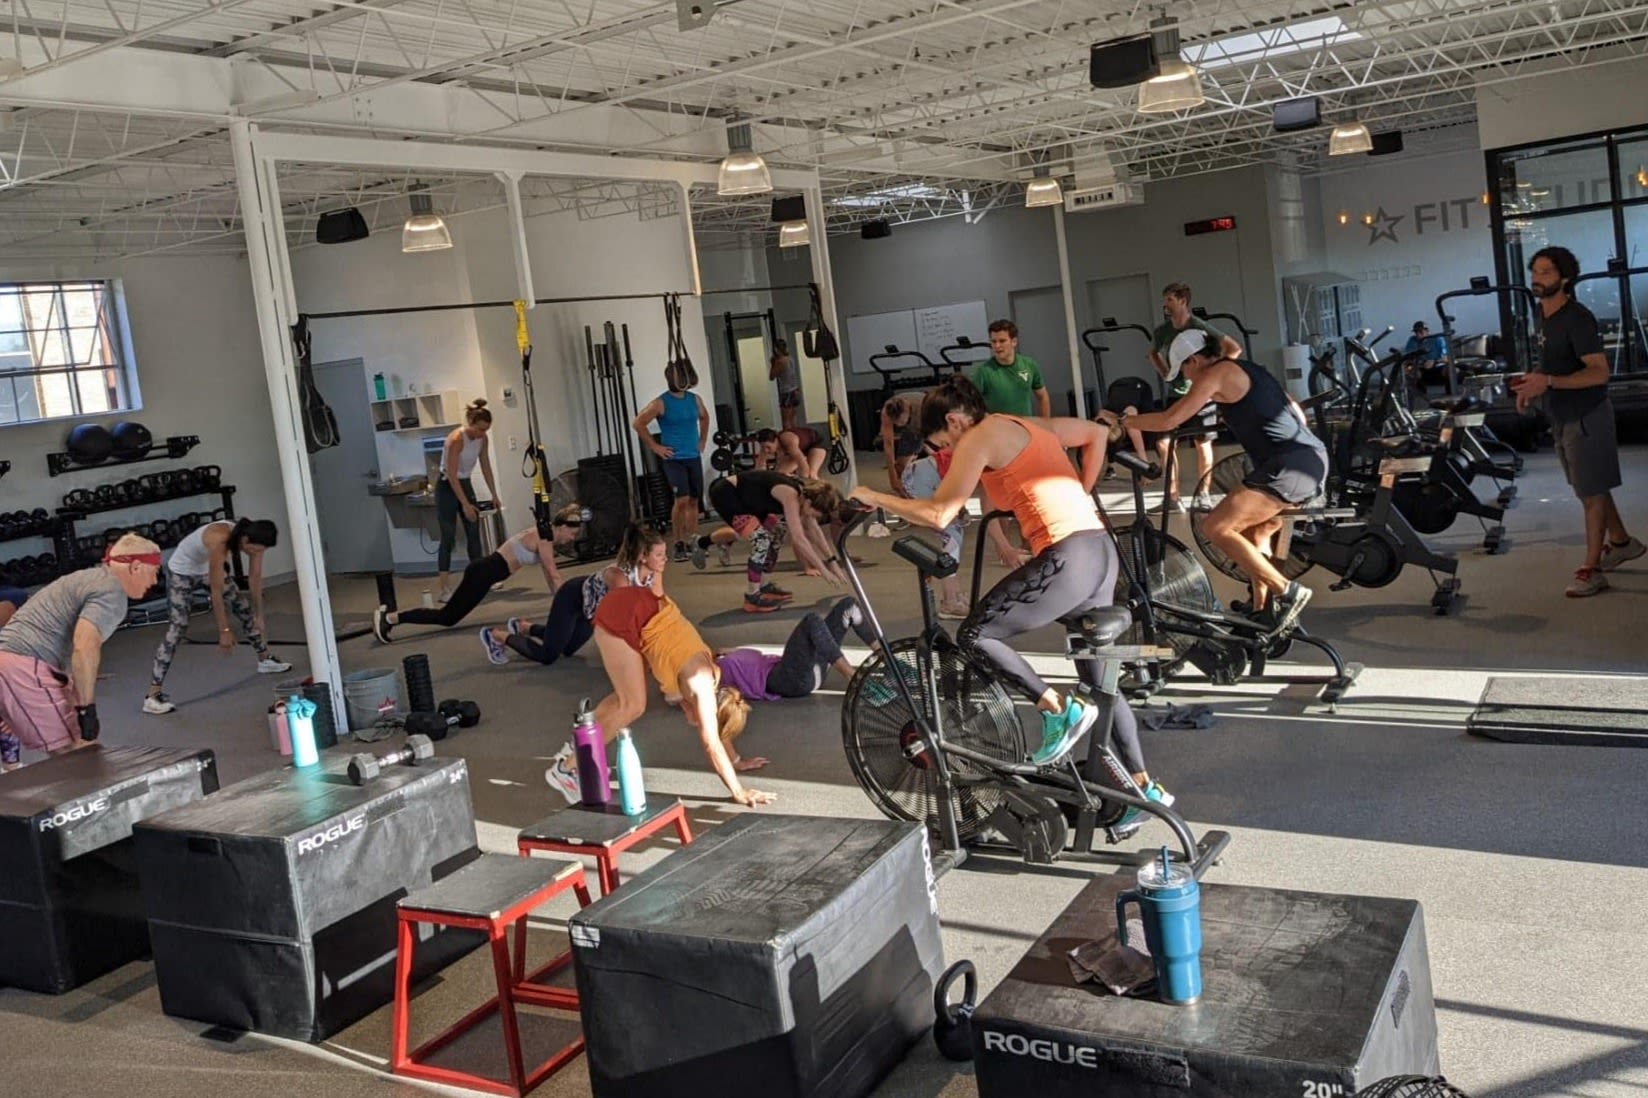 Amazing Fitness: Read Reviews and Book Classes on ClassPass